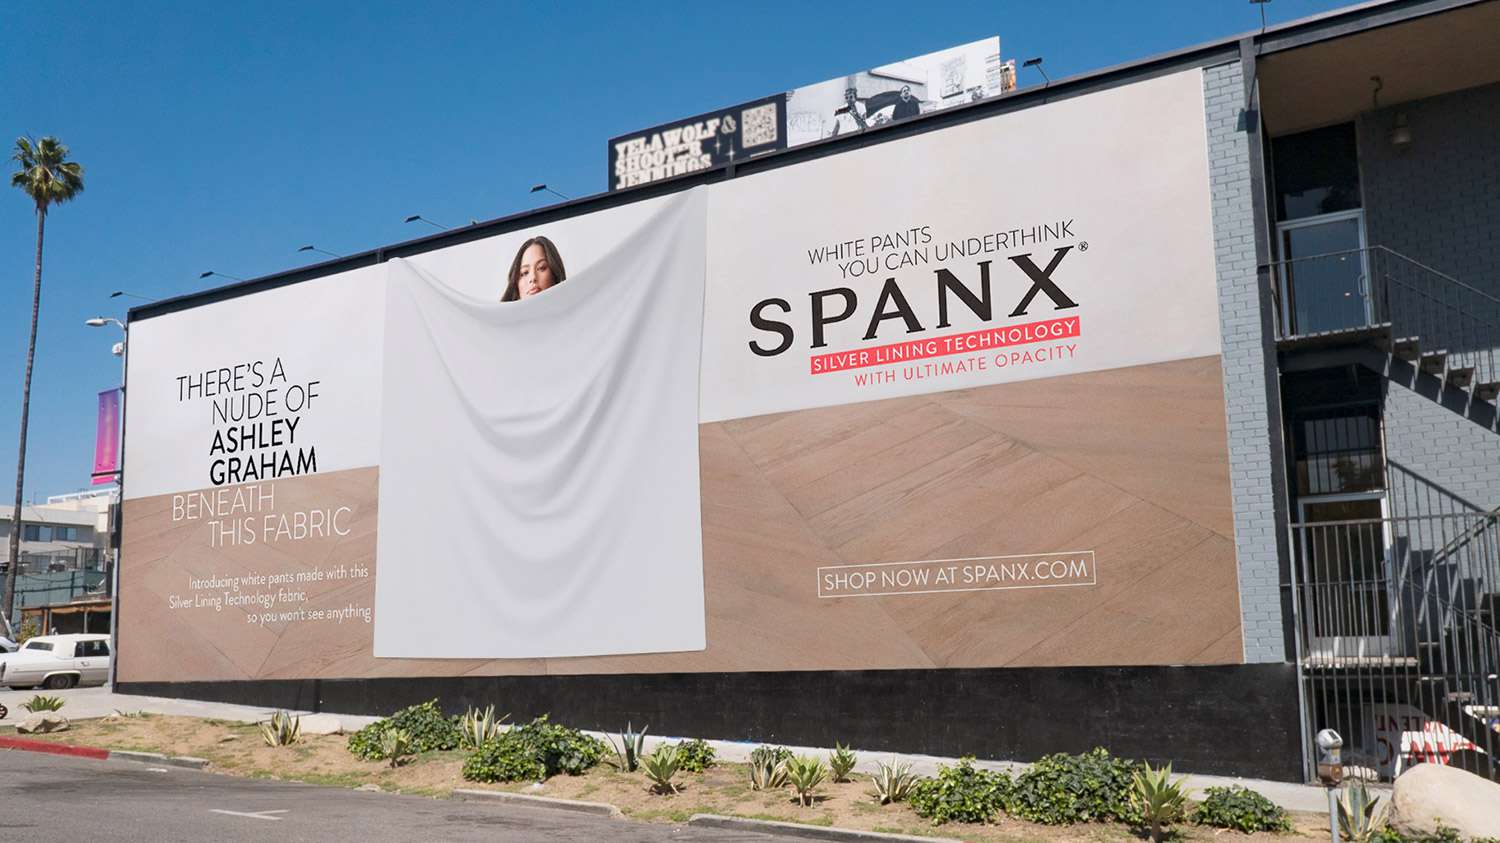 Ashley Graham Poses Nude for Spanx Ad 4 Months Postpartum: ‘Much More Gratitude Toward My Body’